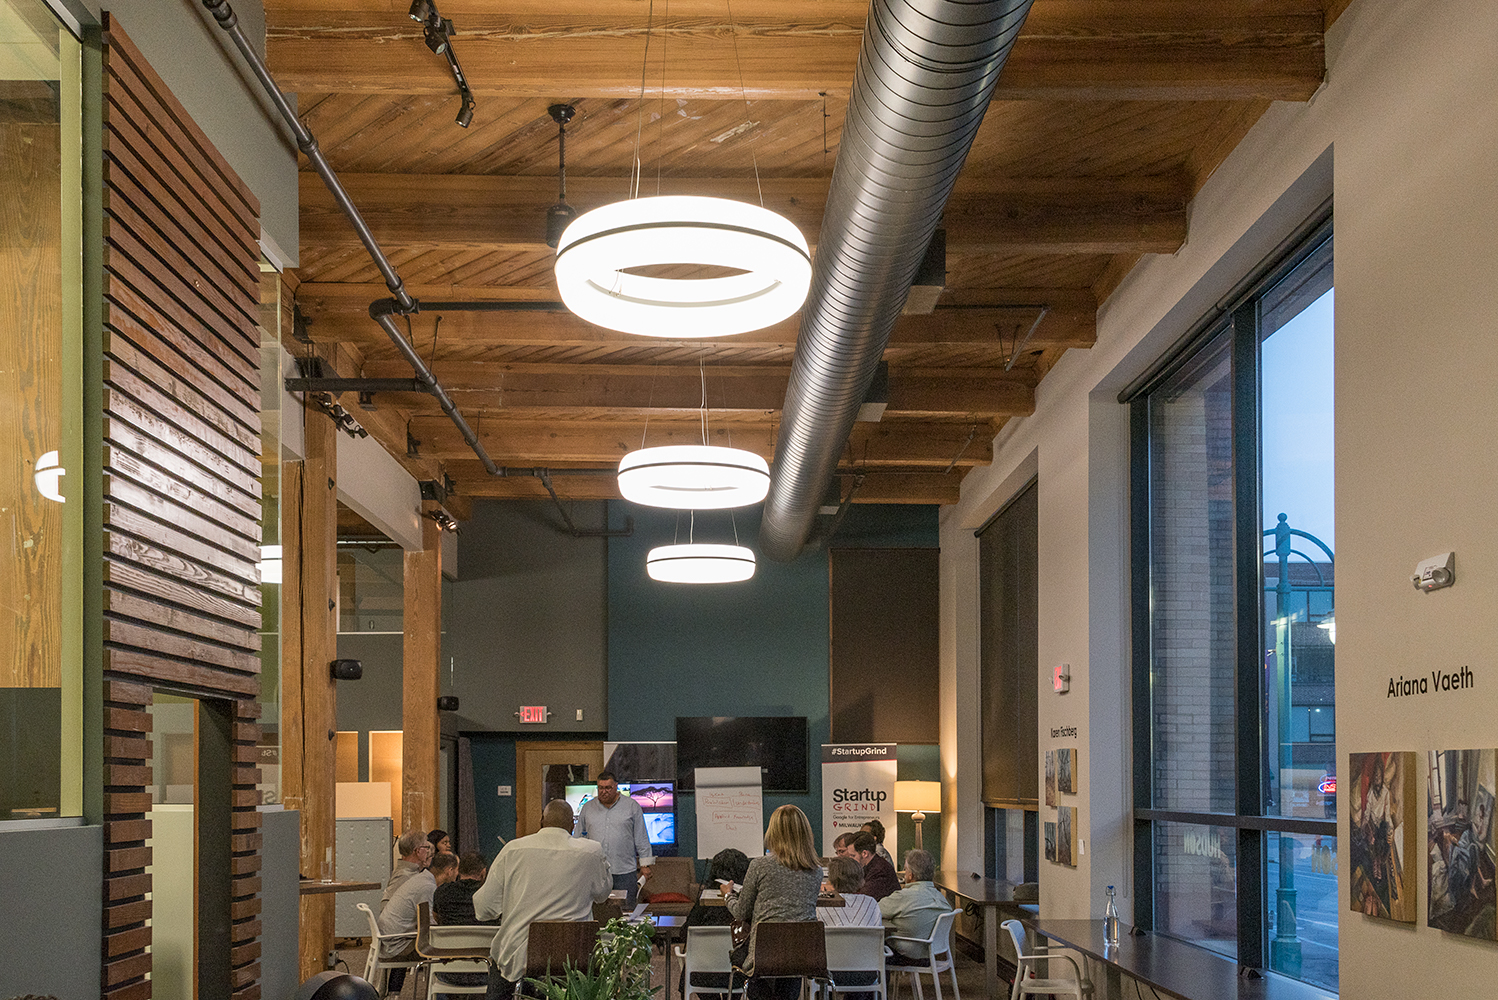 Meridian Round pendant is perfect for office lighting, seen here above a casual café area in a large office building.